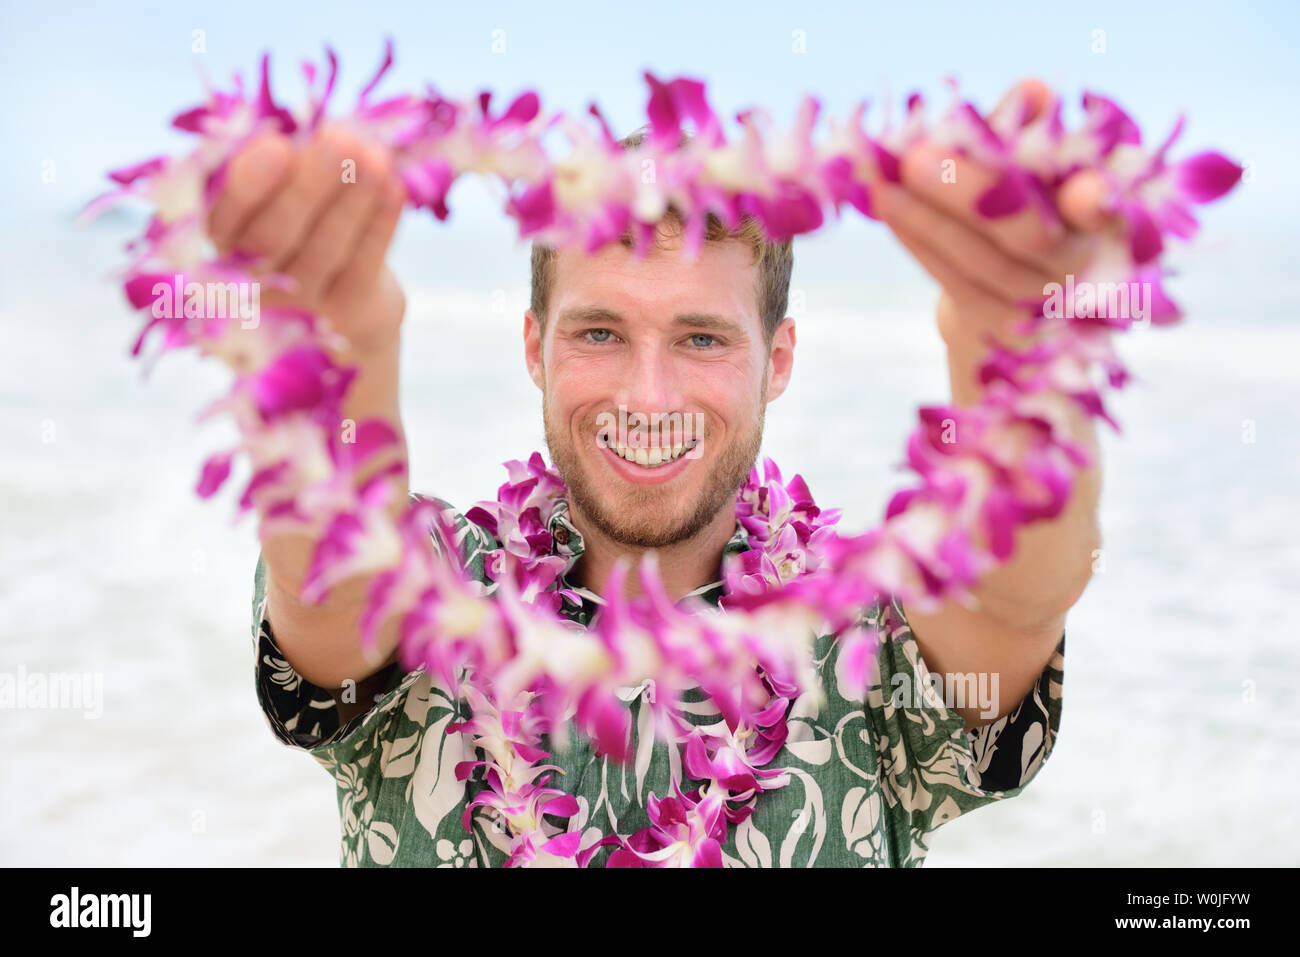 Hawaii Caucasian man with welcome Hawaiian lei. Male tourist portrait holding flower necklace giving it to the camera as a welcoming gesture for tourism in Hawaii. Travel vacation concept. Stock Photo